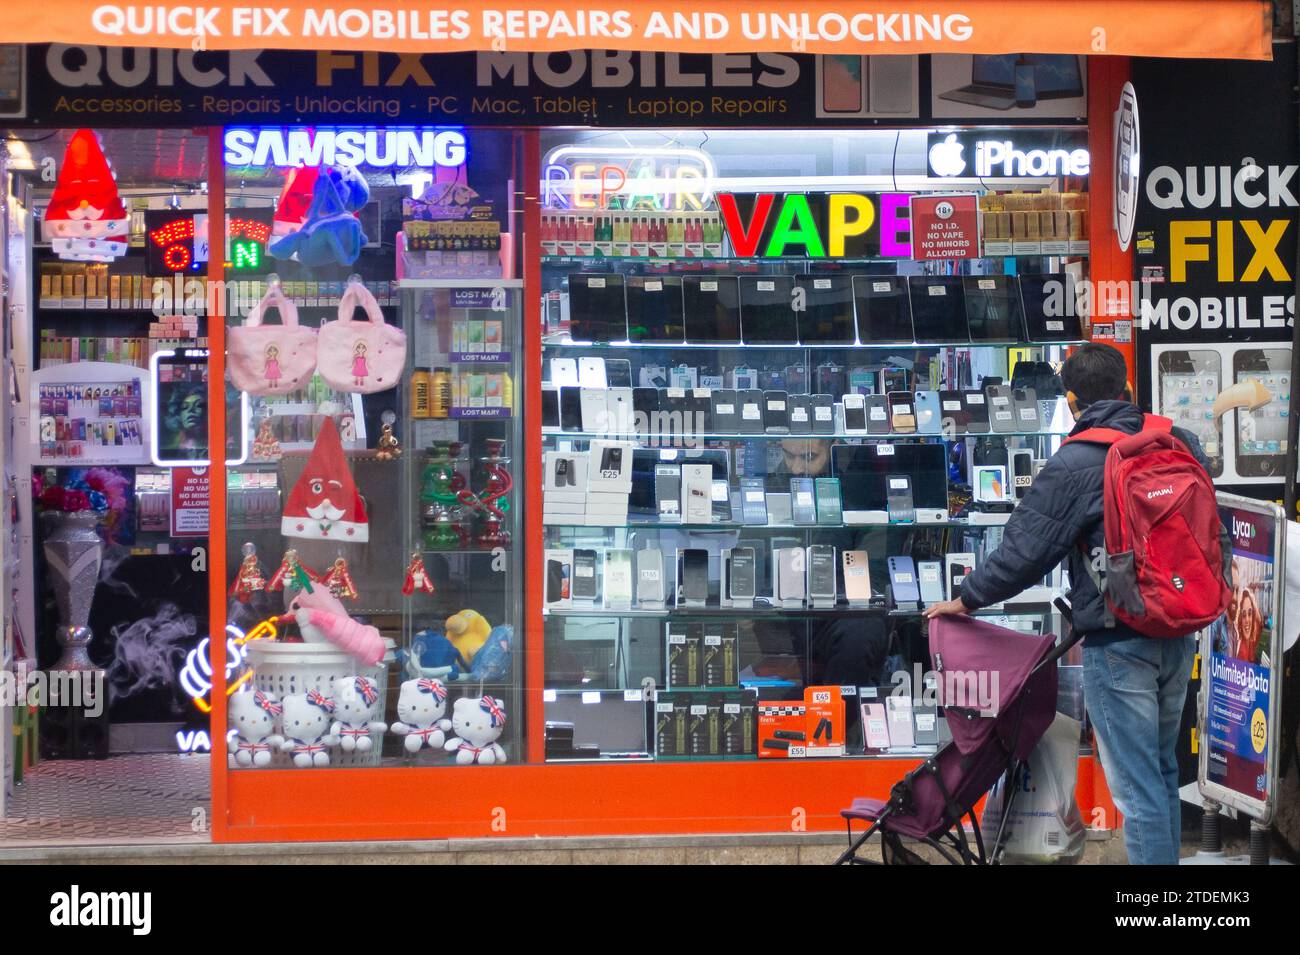 Slough, Berkshire, UK. 16th December, 2023. Vape advertising in a shop in Slough, Berkshire. The World Health Organisation has called for flavoured vapes to be banned worldwide. They have said  that 'urgent measures' are were needed to control e-cigarettes. There are many ex smokers who are now hooked on vaping. Credit: Maureen McLean/Alamy Stock Photo